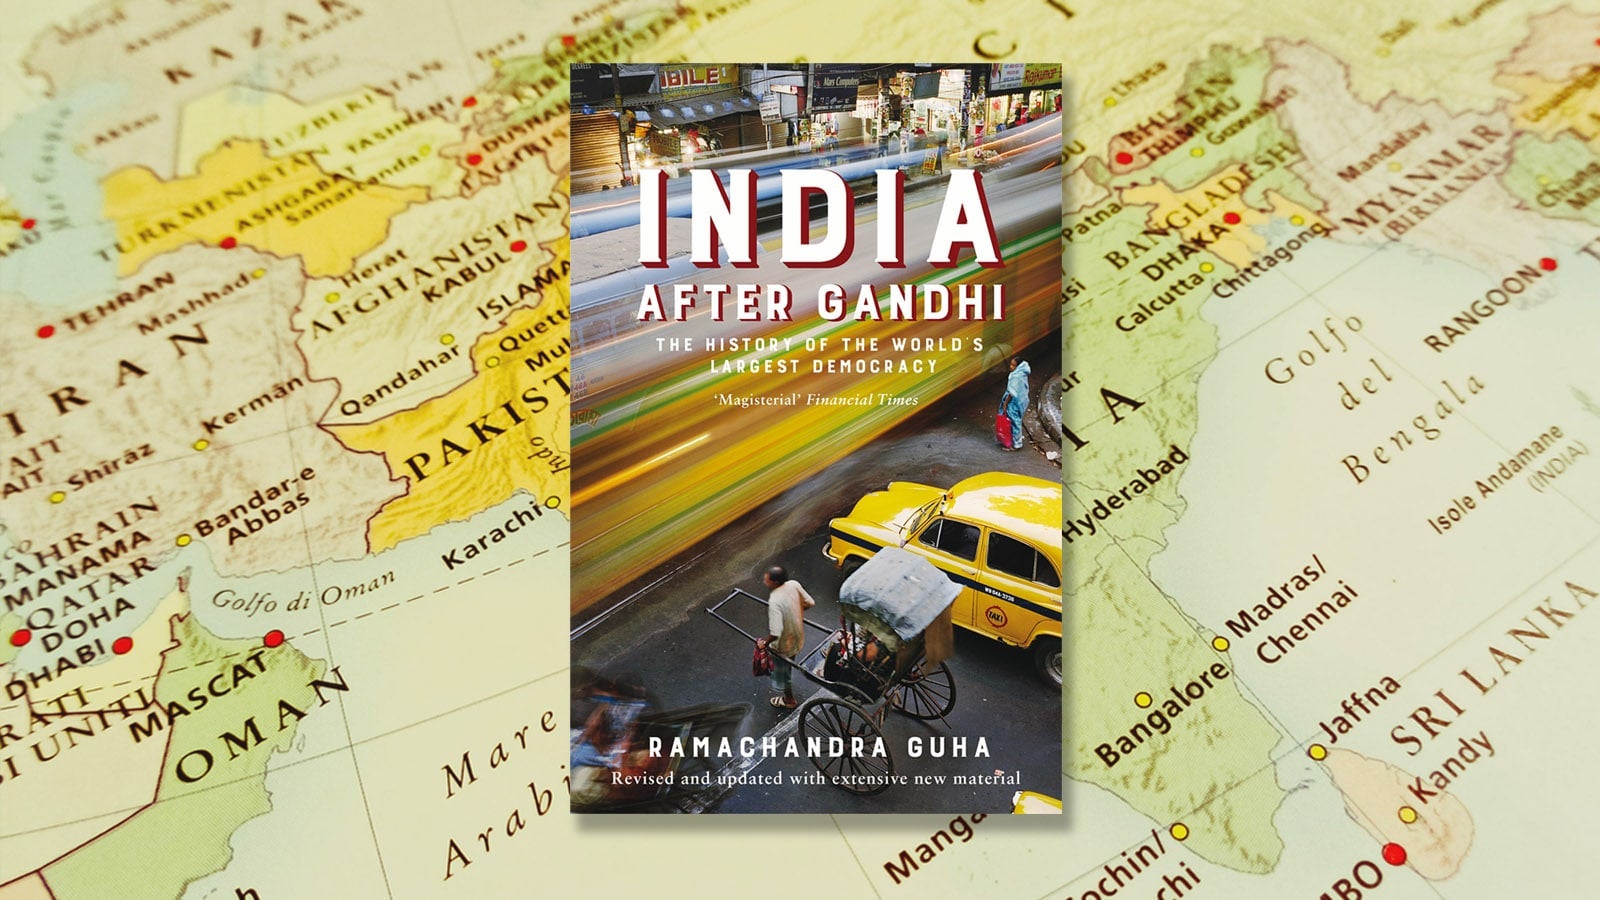 India After Gandhi book cover with a map of Asia and the Middle East as the background image